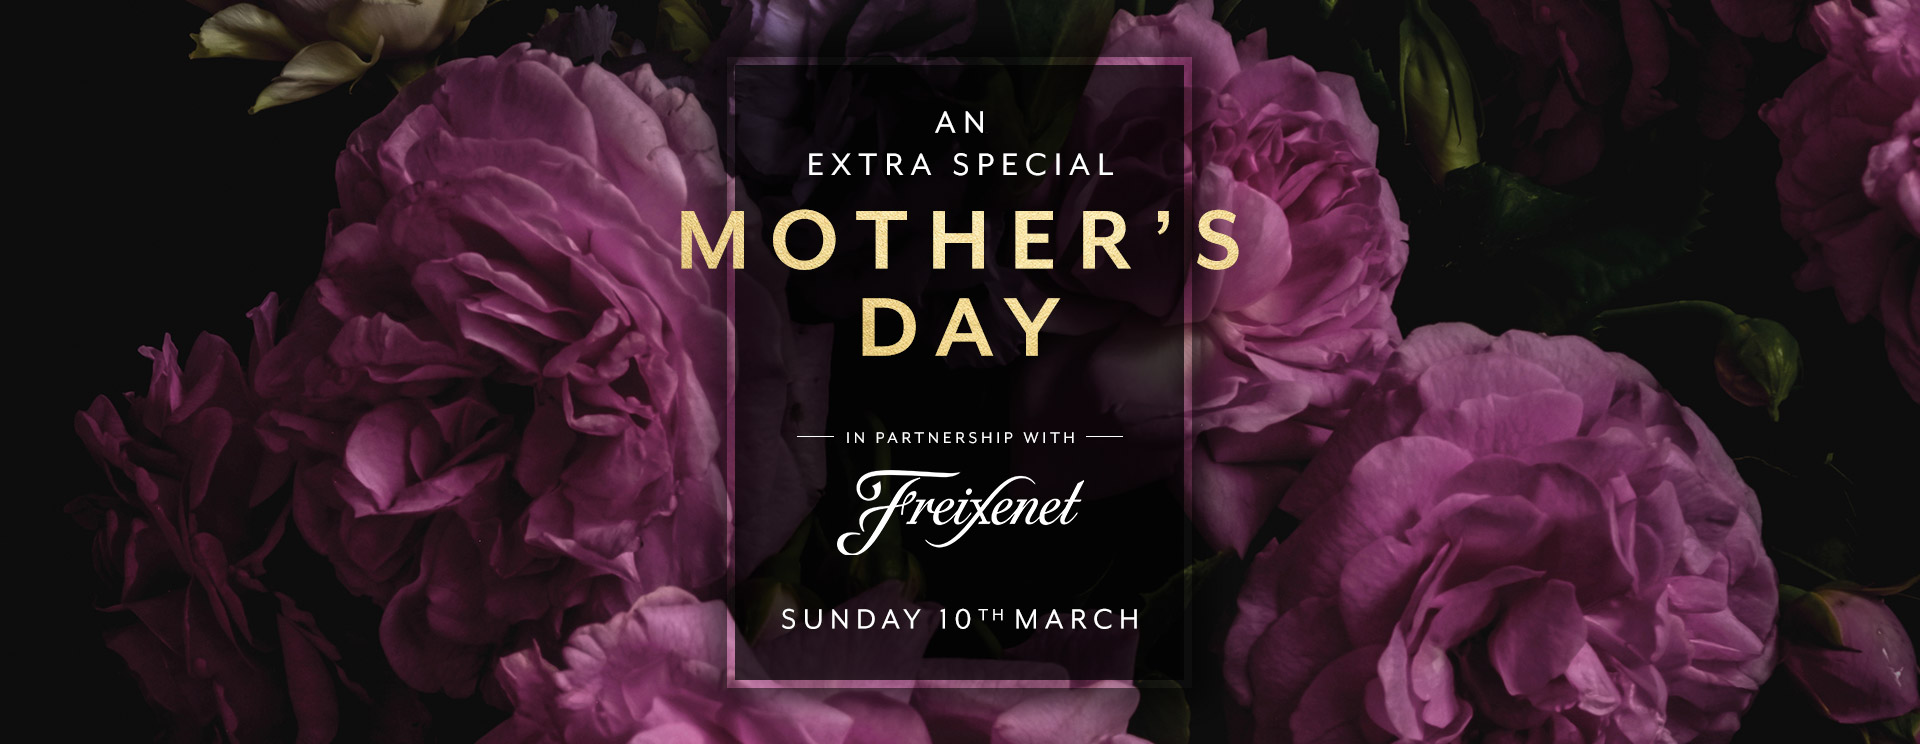 Mother’s Day menu/meal in Stockport